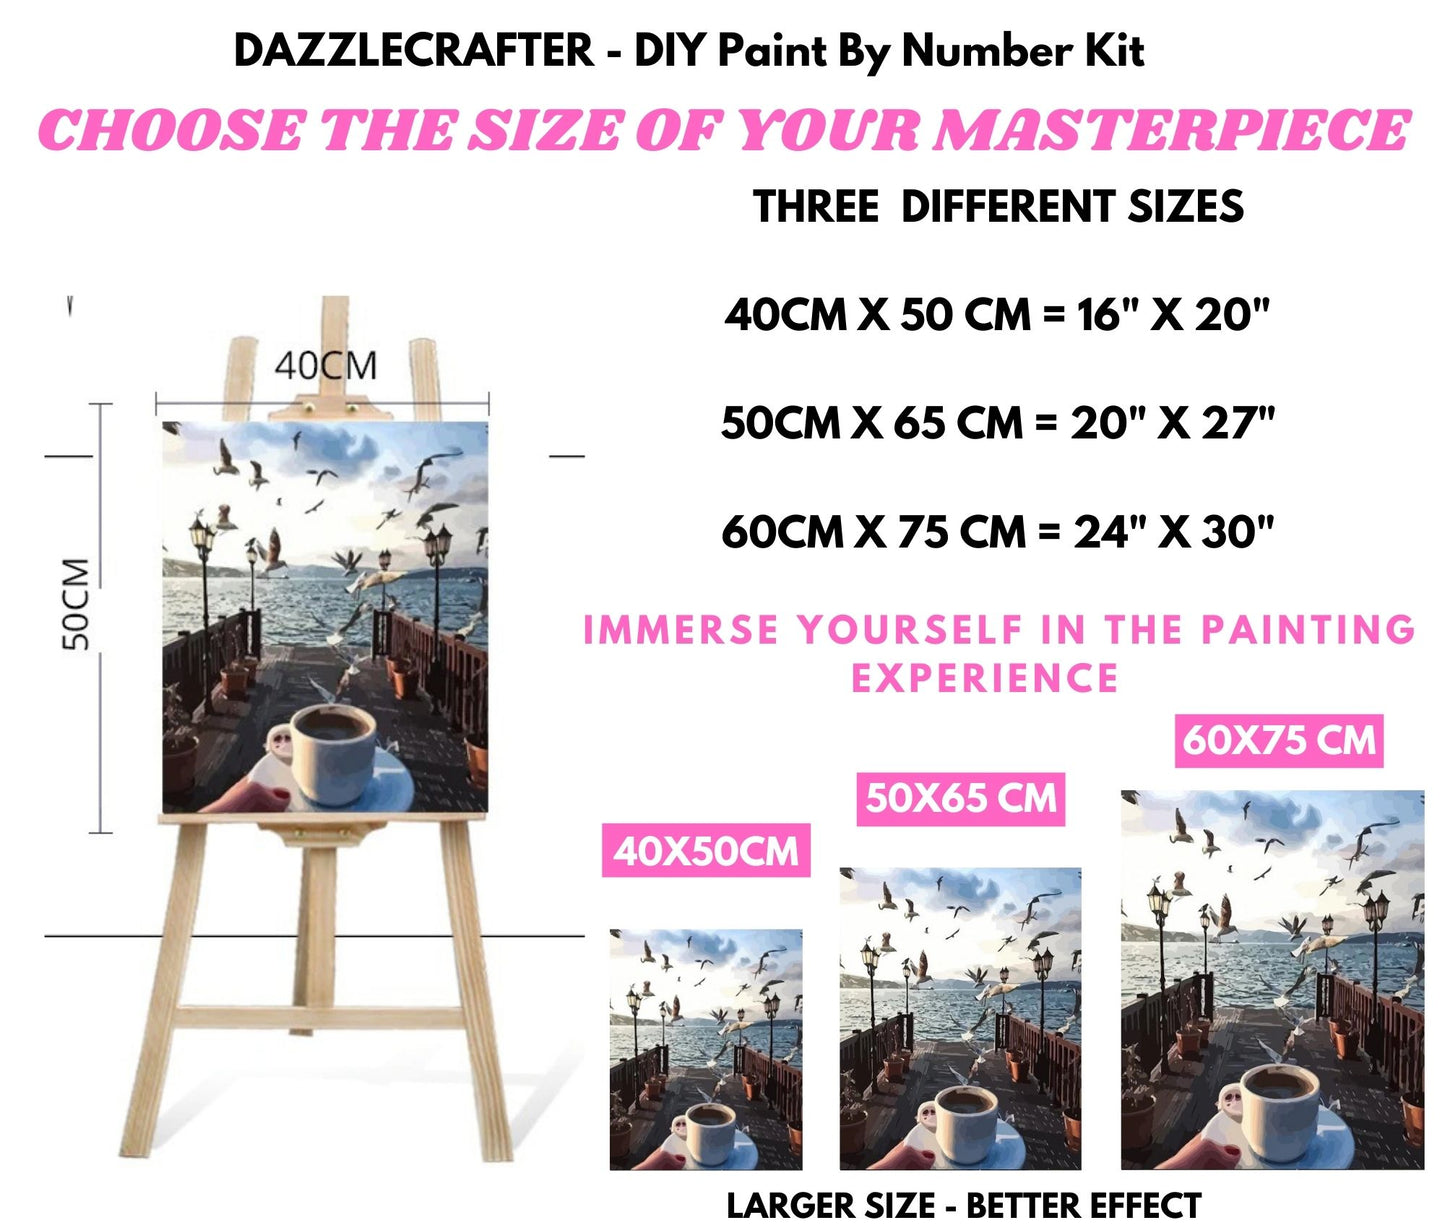 CAT GAZING OUT OF THE WINDOW  - DIY Adult Paint By Number Kit